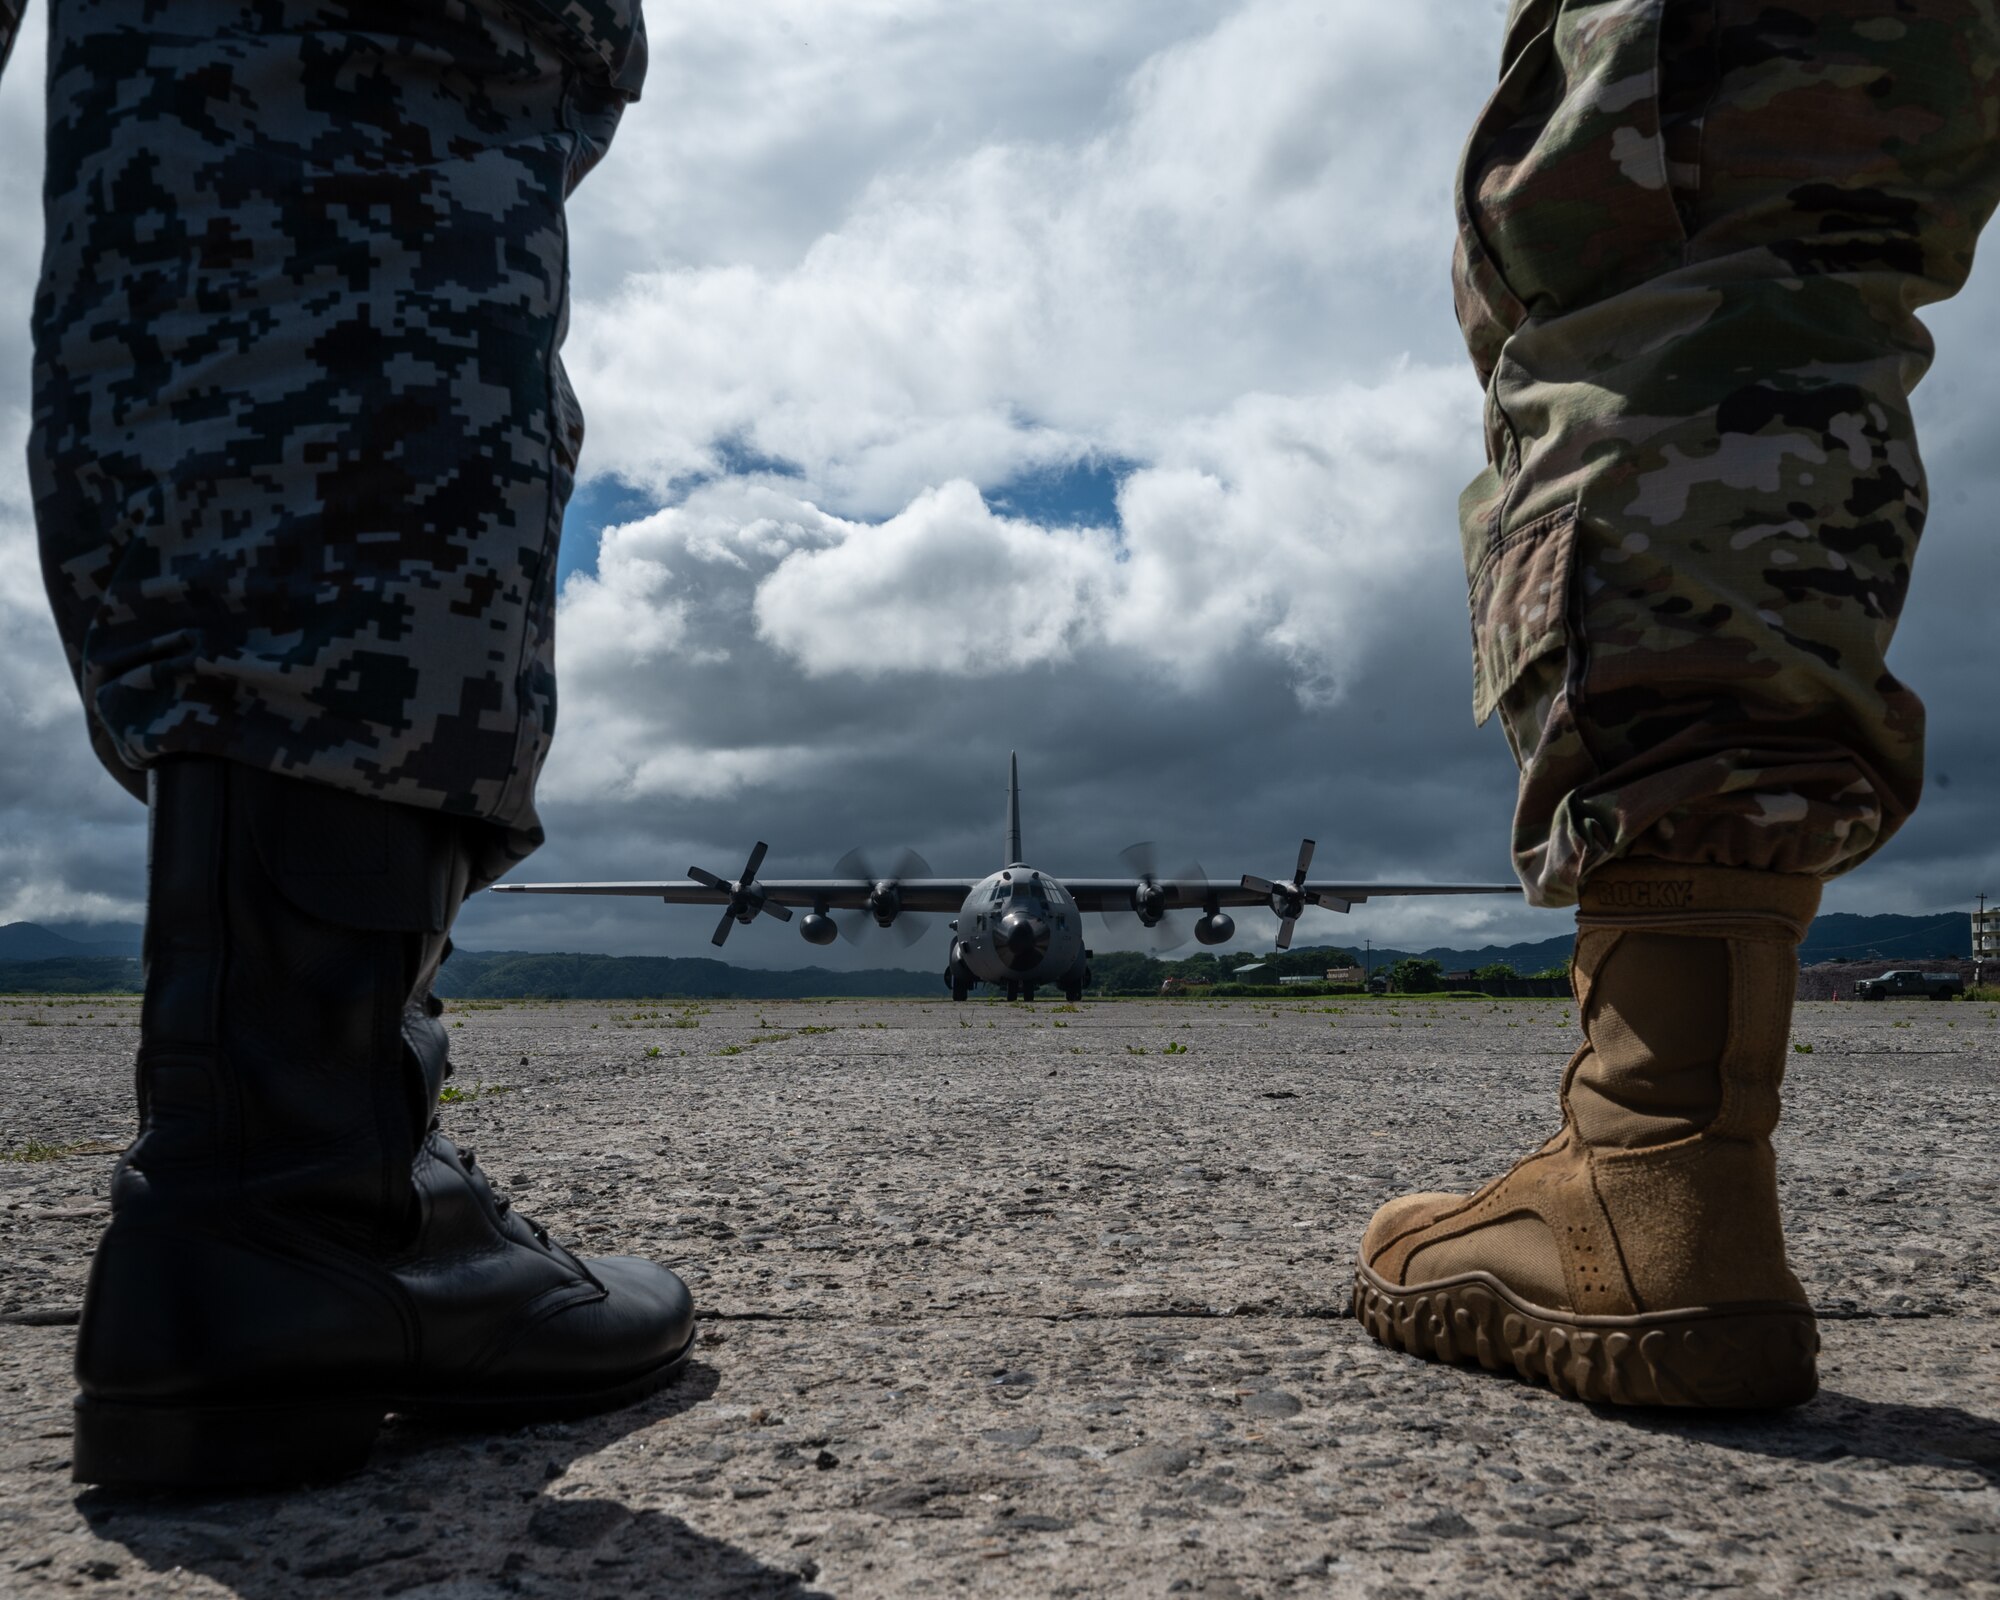 U.S. Air Force and Japanese Air Self Defense Force Airmen wait for the departure of a  C-130 Hercules from Yakumo Air Base, Japan July 13, 2023, in support of Mobility Guardian 2023 during a site visit to Yakumo Air Base, Japan July 13, 2023, in support of Mobility Guardian 2023.A multilateral endeavor, MG23 features seven participating countries – Australia, Canada, France, Japan, New Zealand, United Kingdom, and the United States – operating approximately 70 mobility aircraft across multiple locations spanning a 3,000 mile exercise area from July 5th through July 21. Our Allies and partners are one of our greatest strengths and a key strategic advantage. MG23 is an opportunity to deepen our connections with regional Allies and partners using bold initiatives. (U.S. Air Force photo by Tech. Sgt. Alexander Cook)